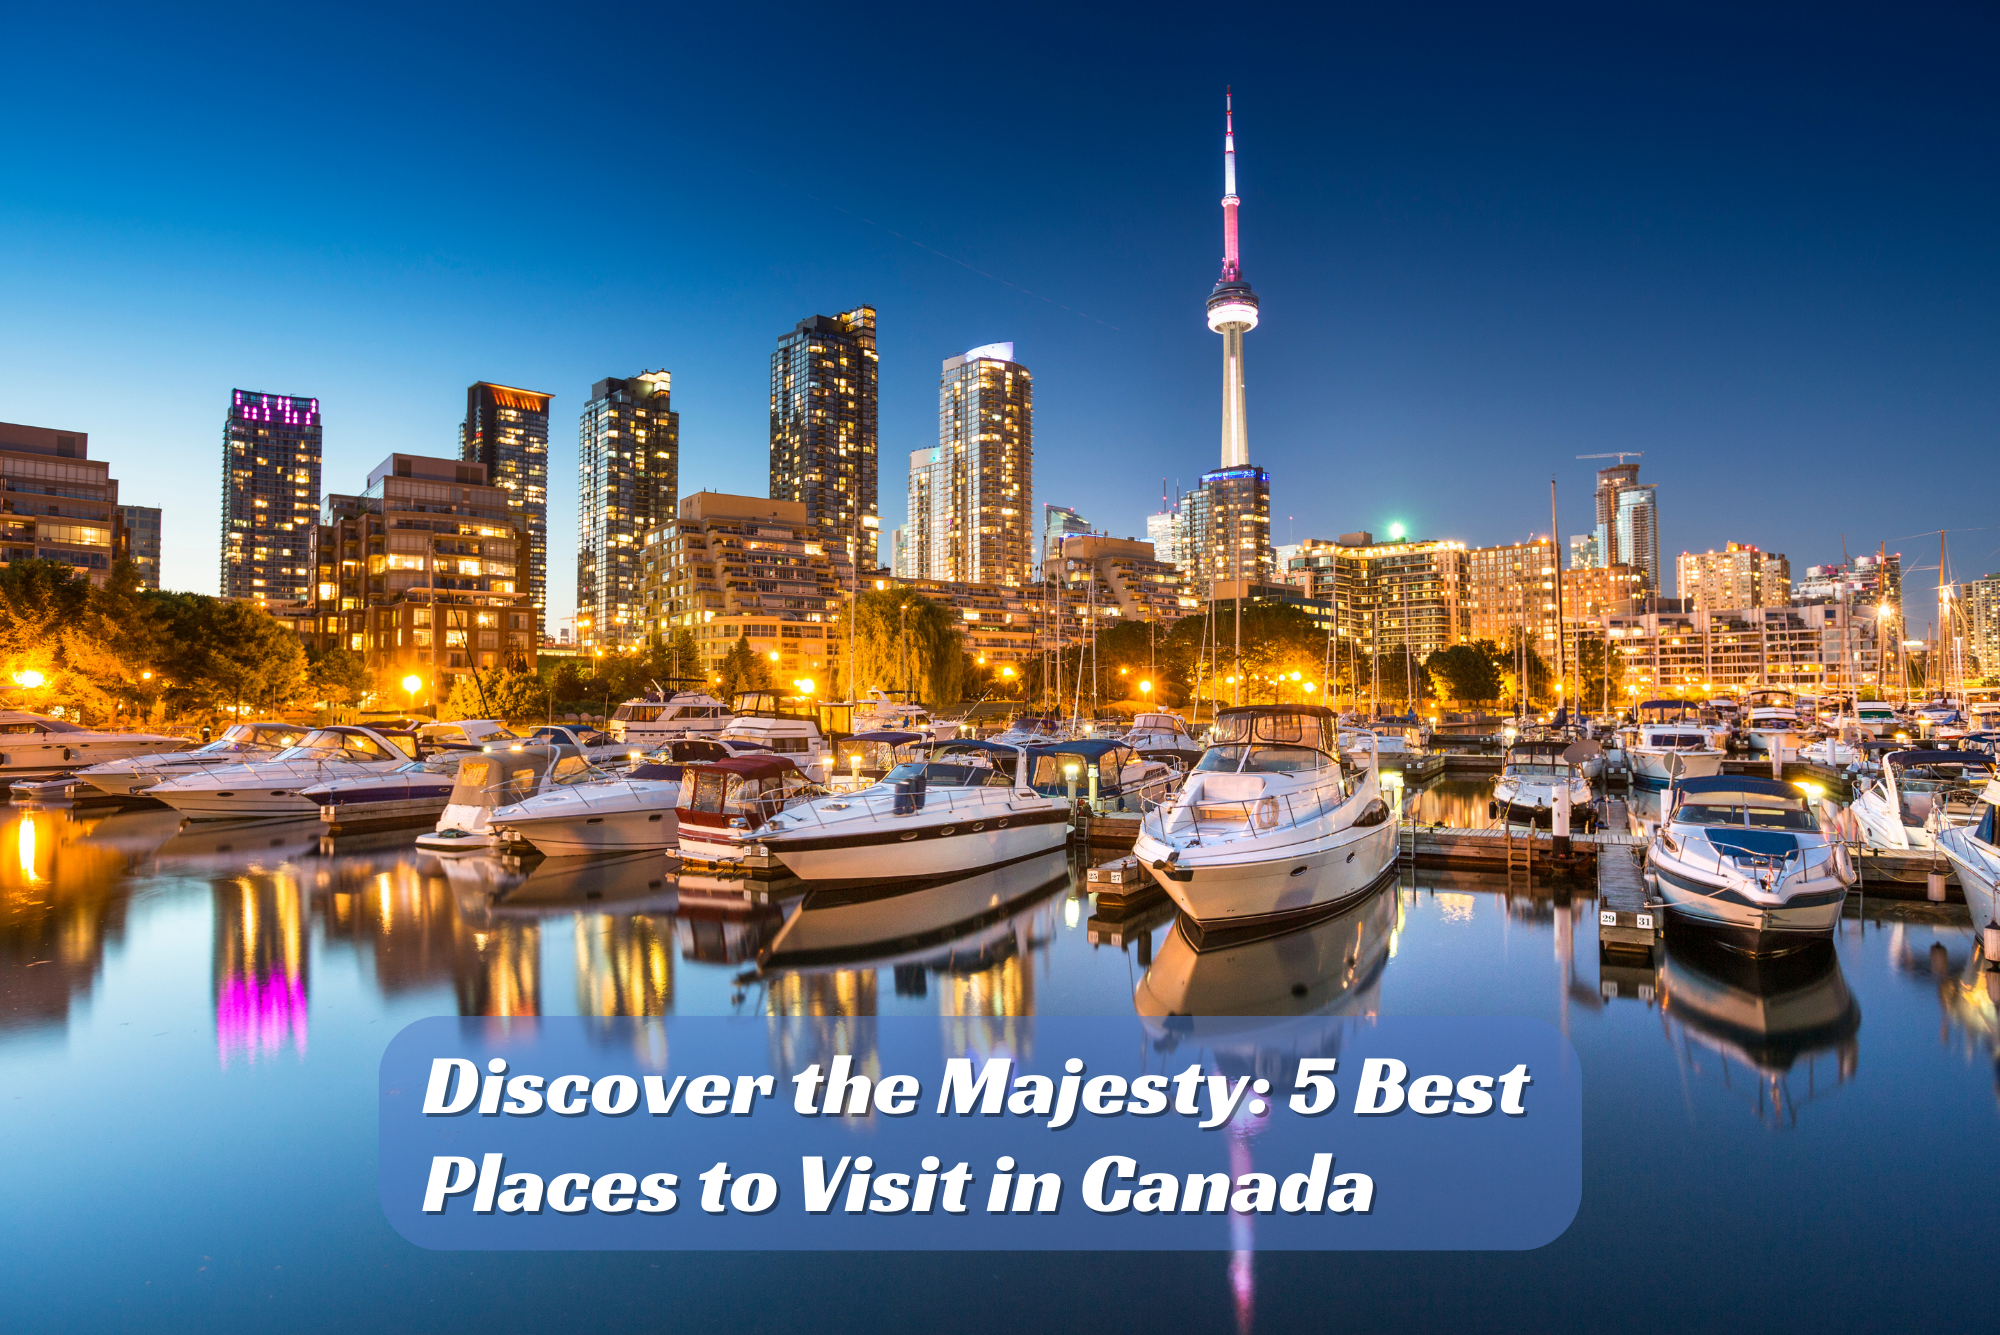 Exploring Canada’s Finest: Best Places to Visit in Canada